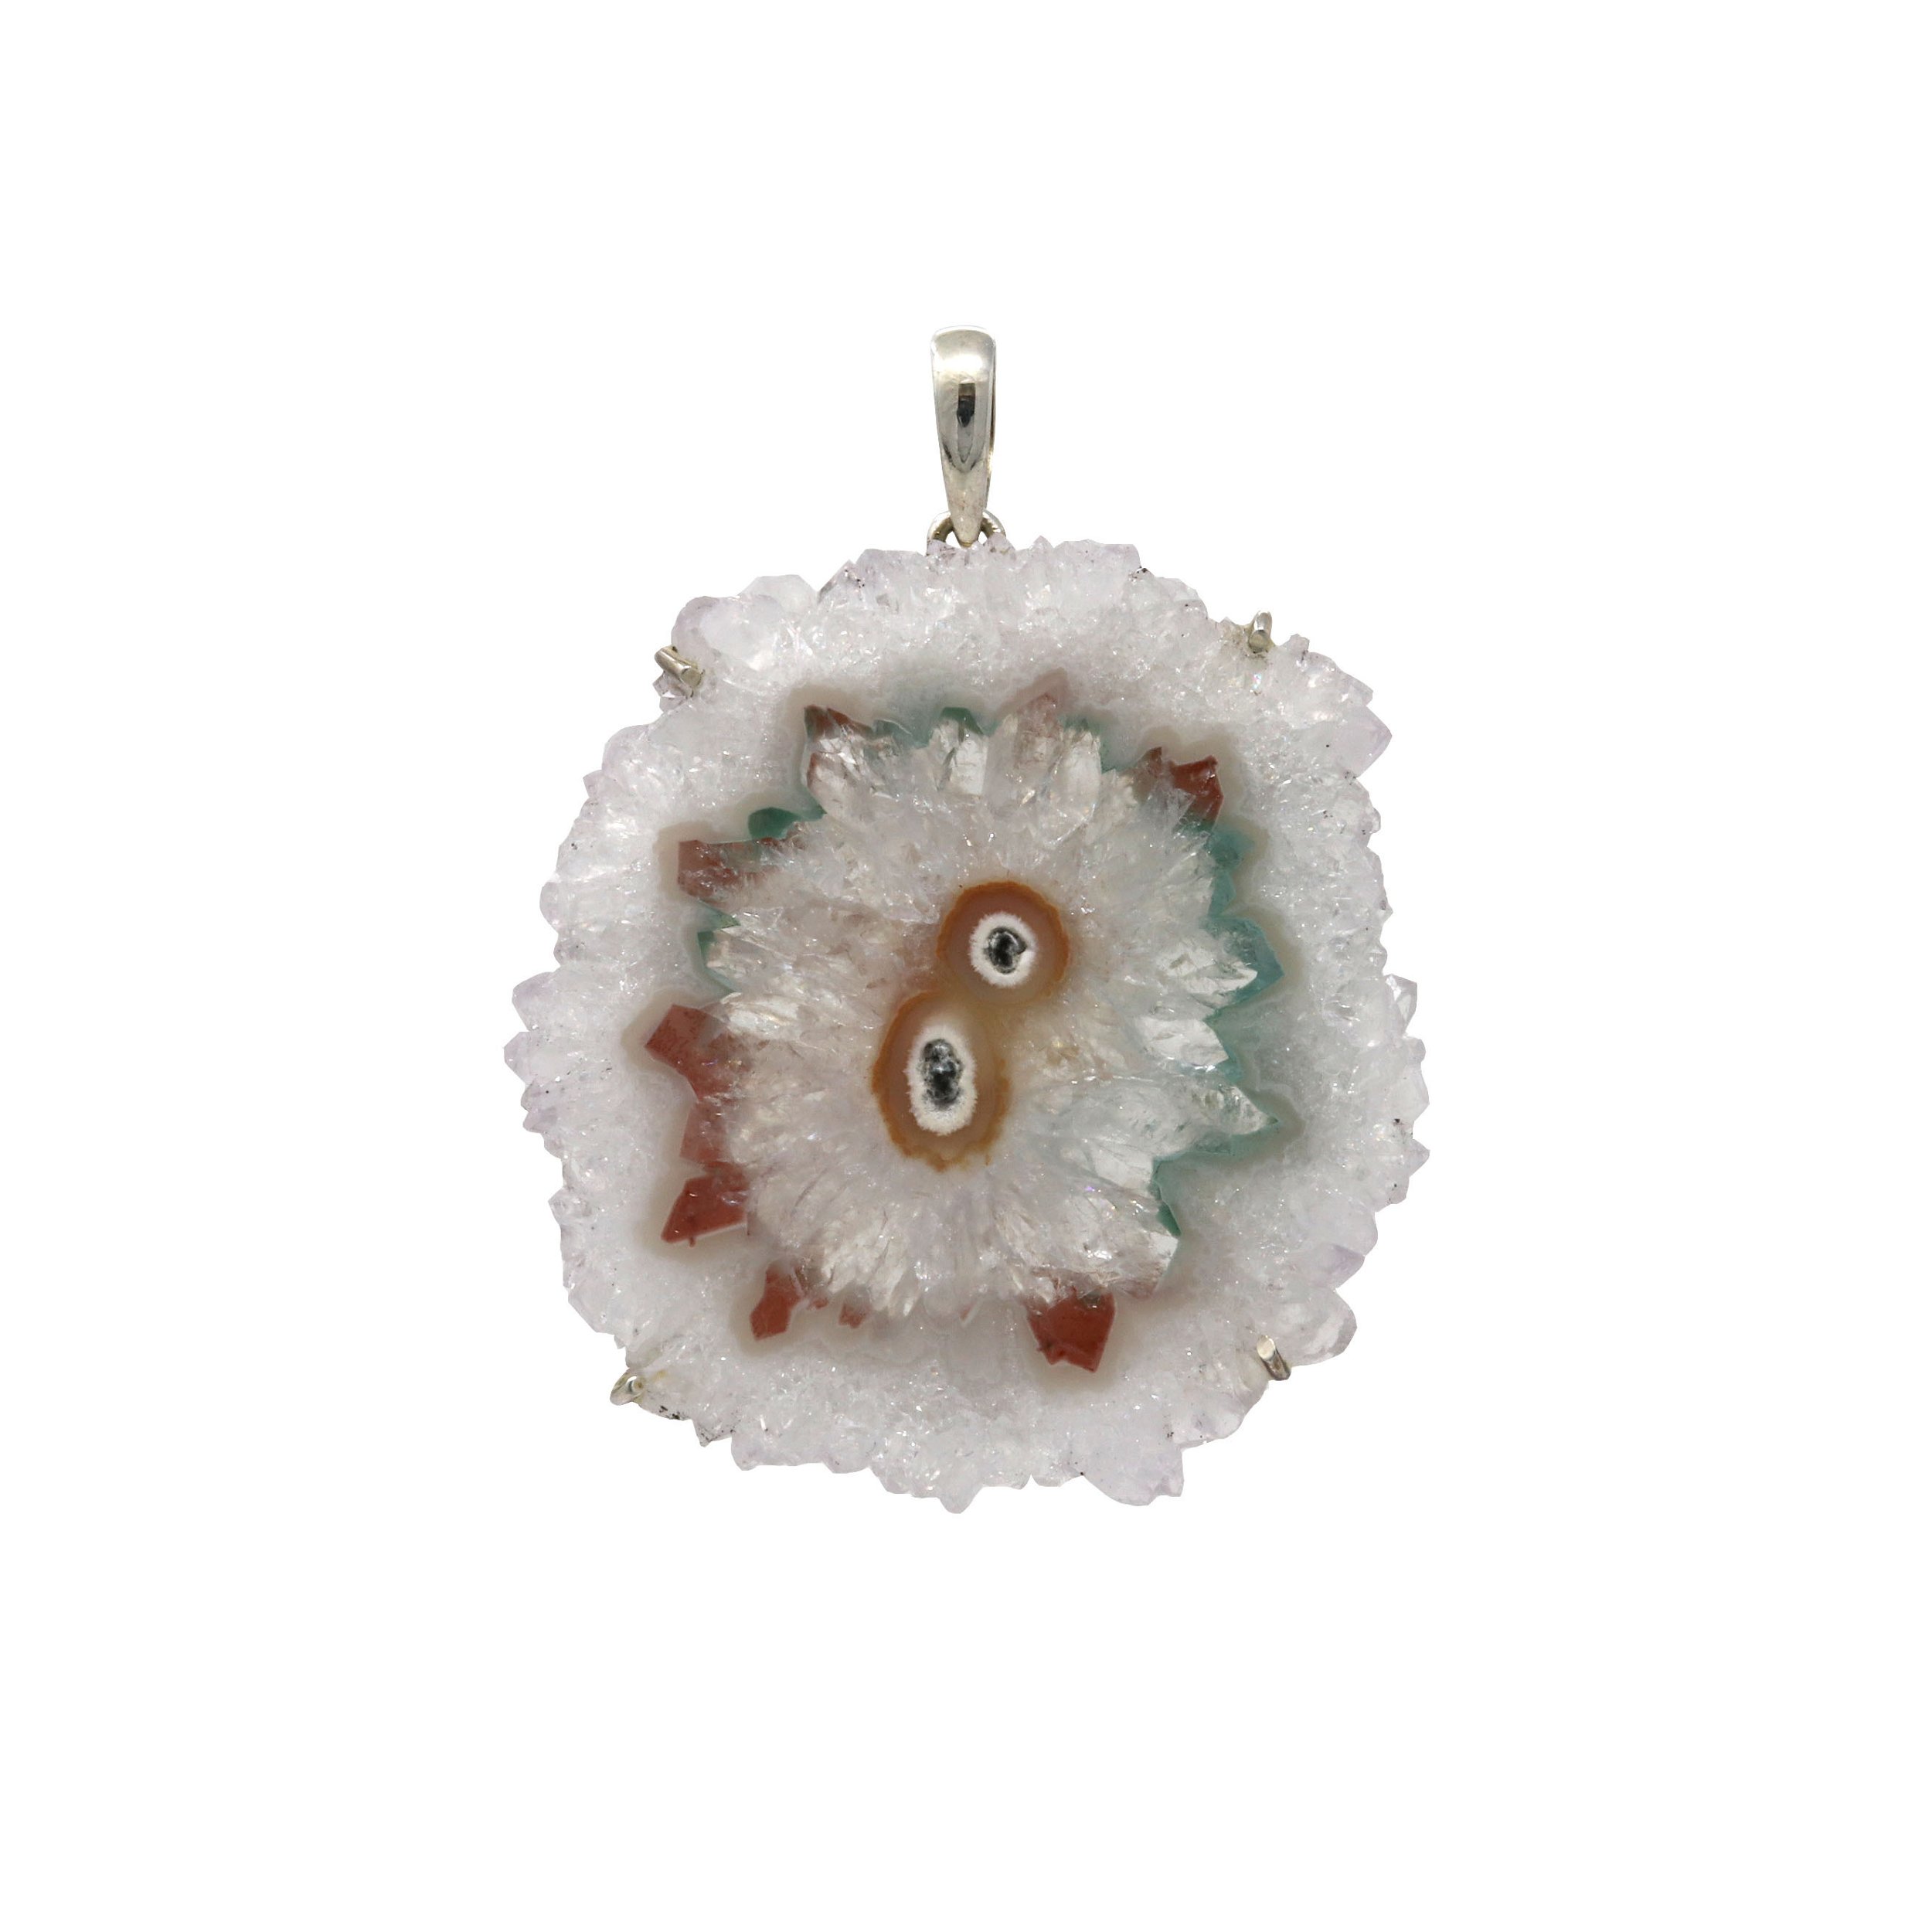 Quartz Stalactite Pendant With Teal And Red Agate Center